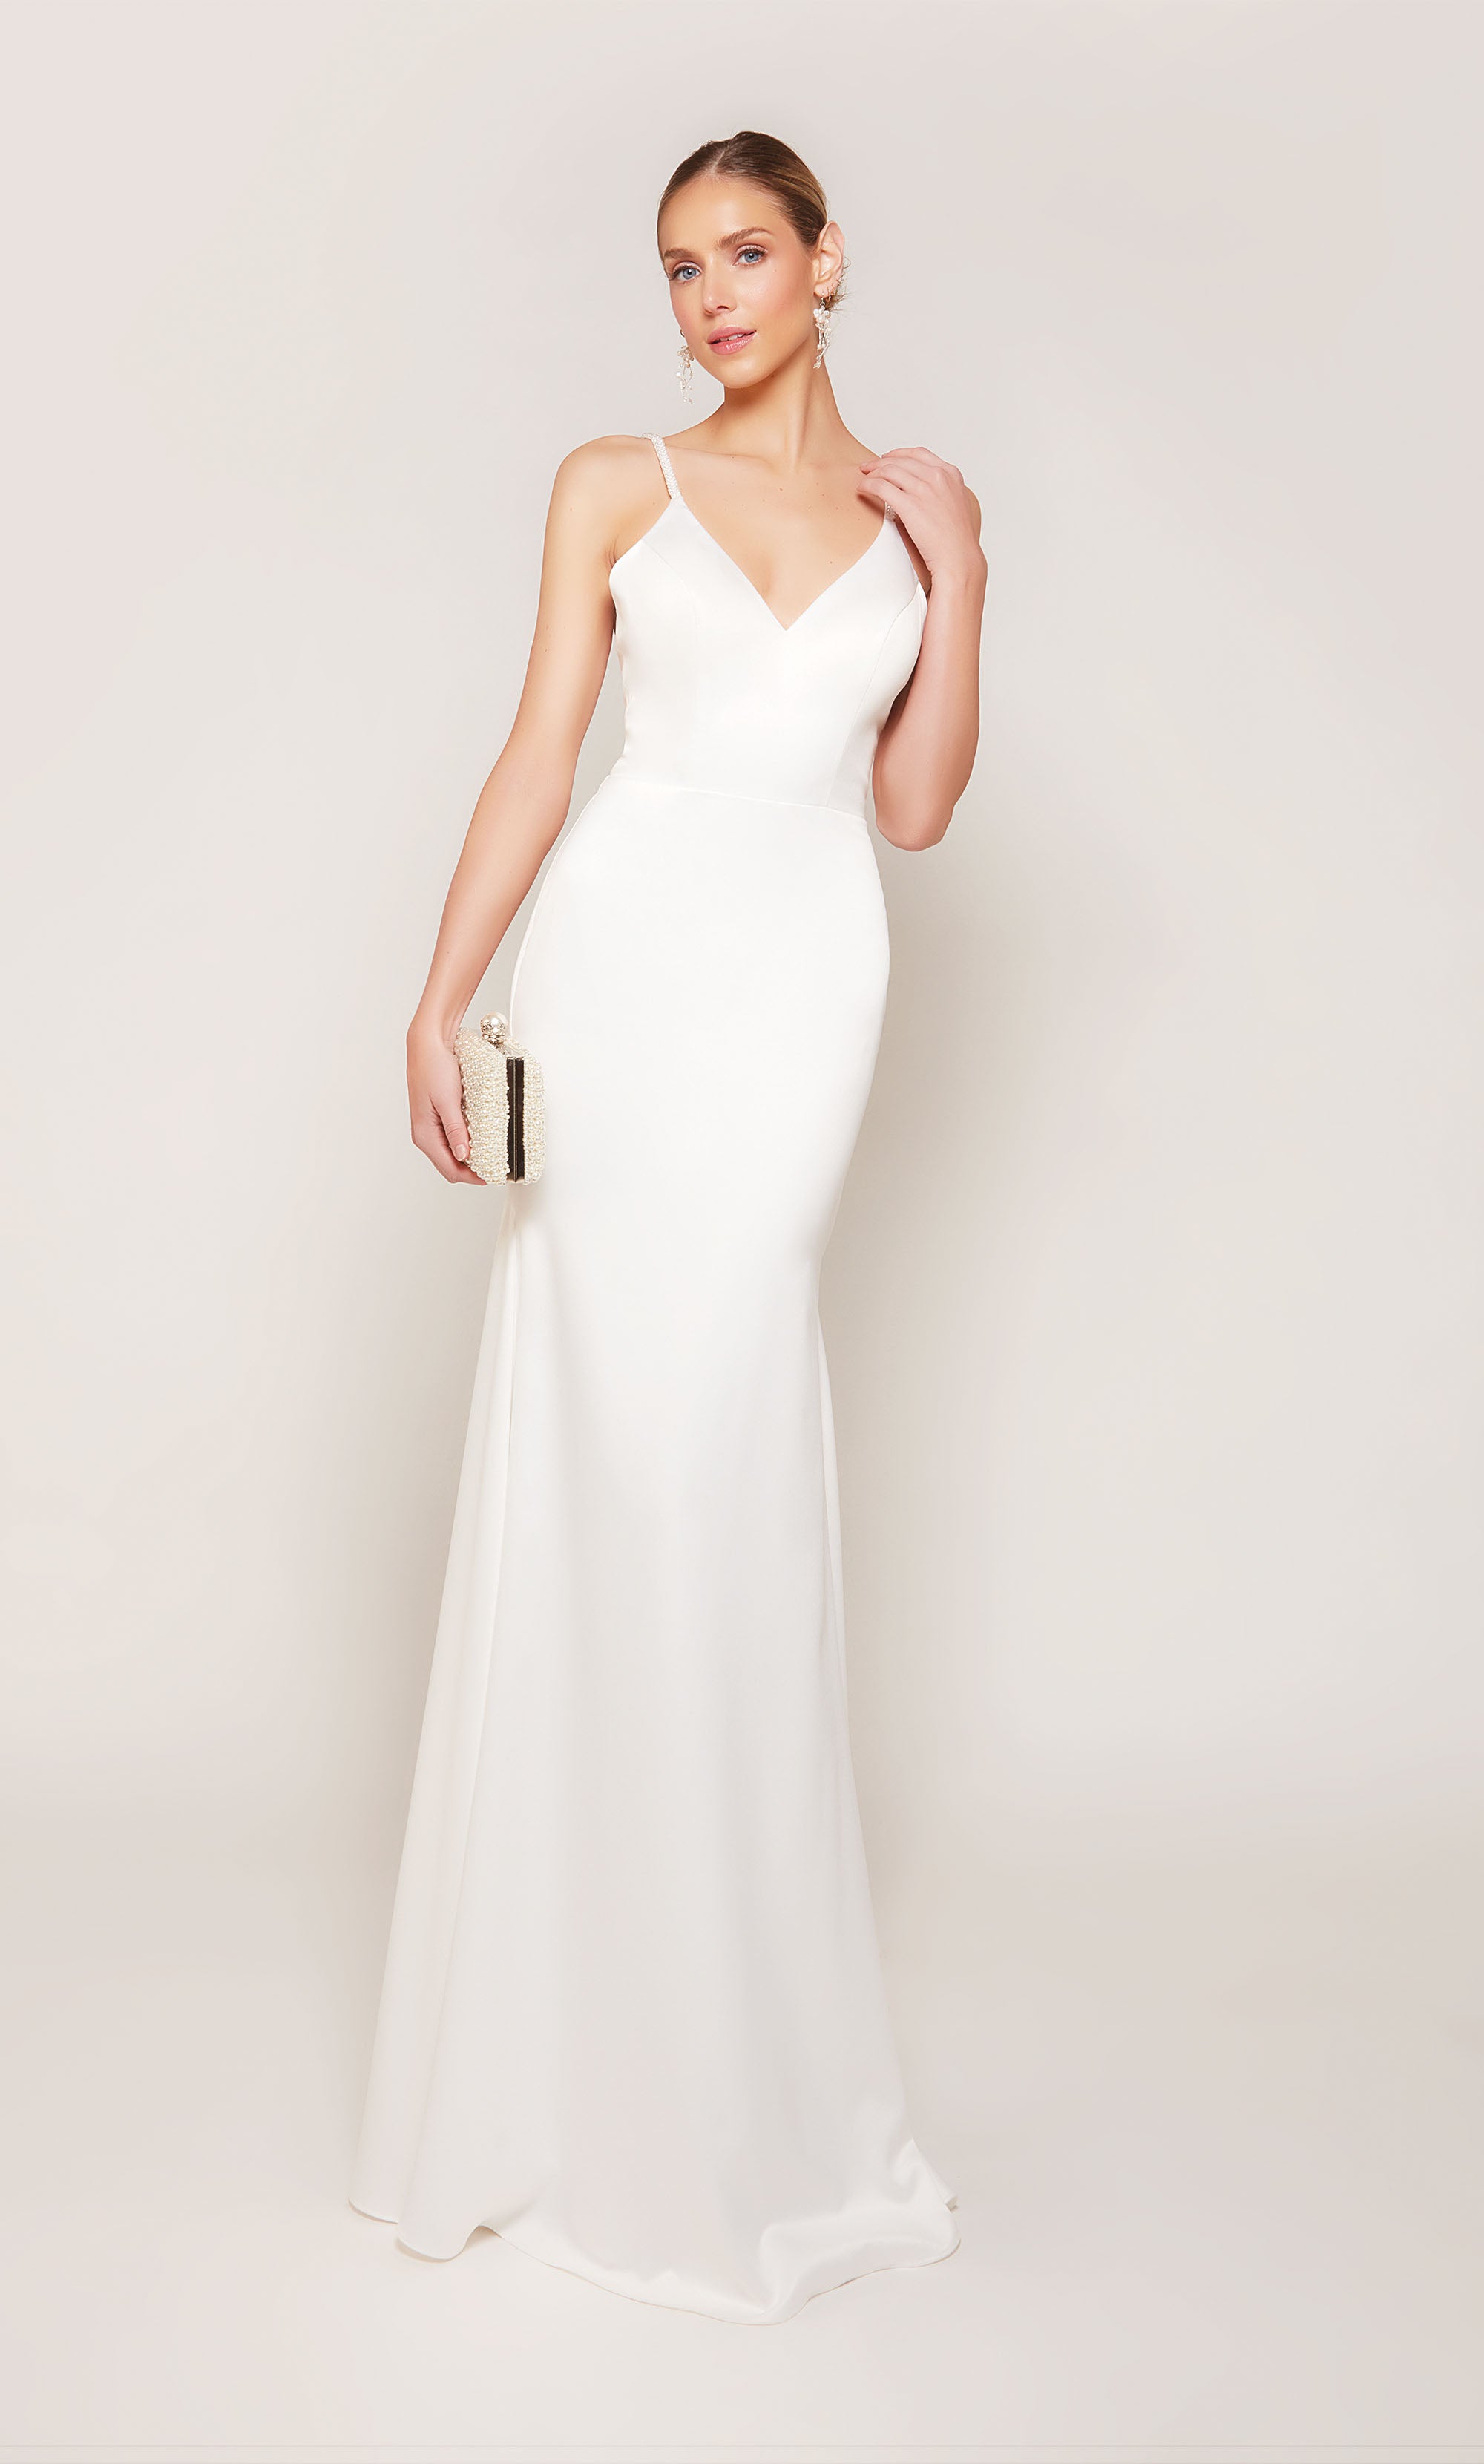 Simple and chic satin wedding dress with a V-neckline and thin spaghetti straps. The dress comes with a detachable train that adds a hint of drama and formality during the ceremony, and can be detached for a more understated reception style.